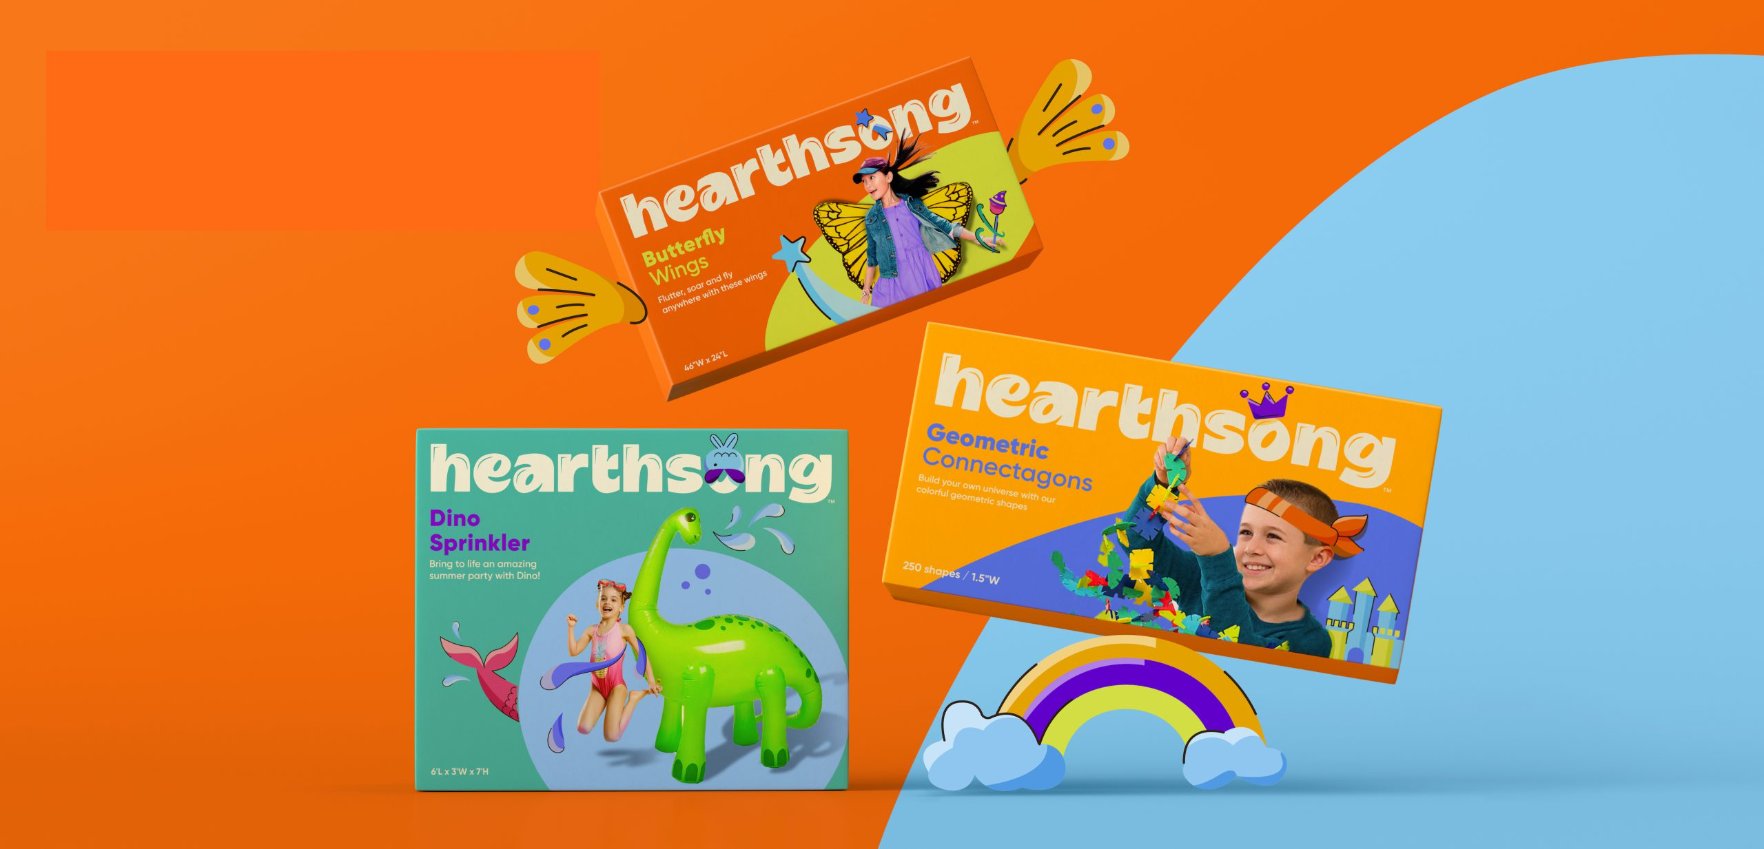 Pearlfisher Updates Toy Brand Hearthsong and Stays True to the Brand’s Mission